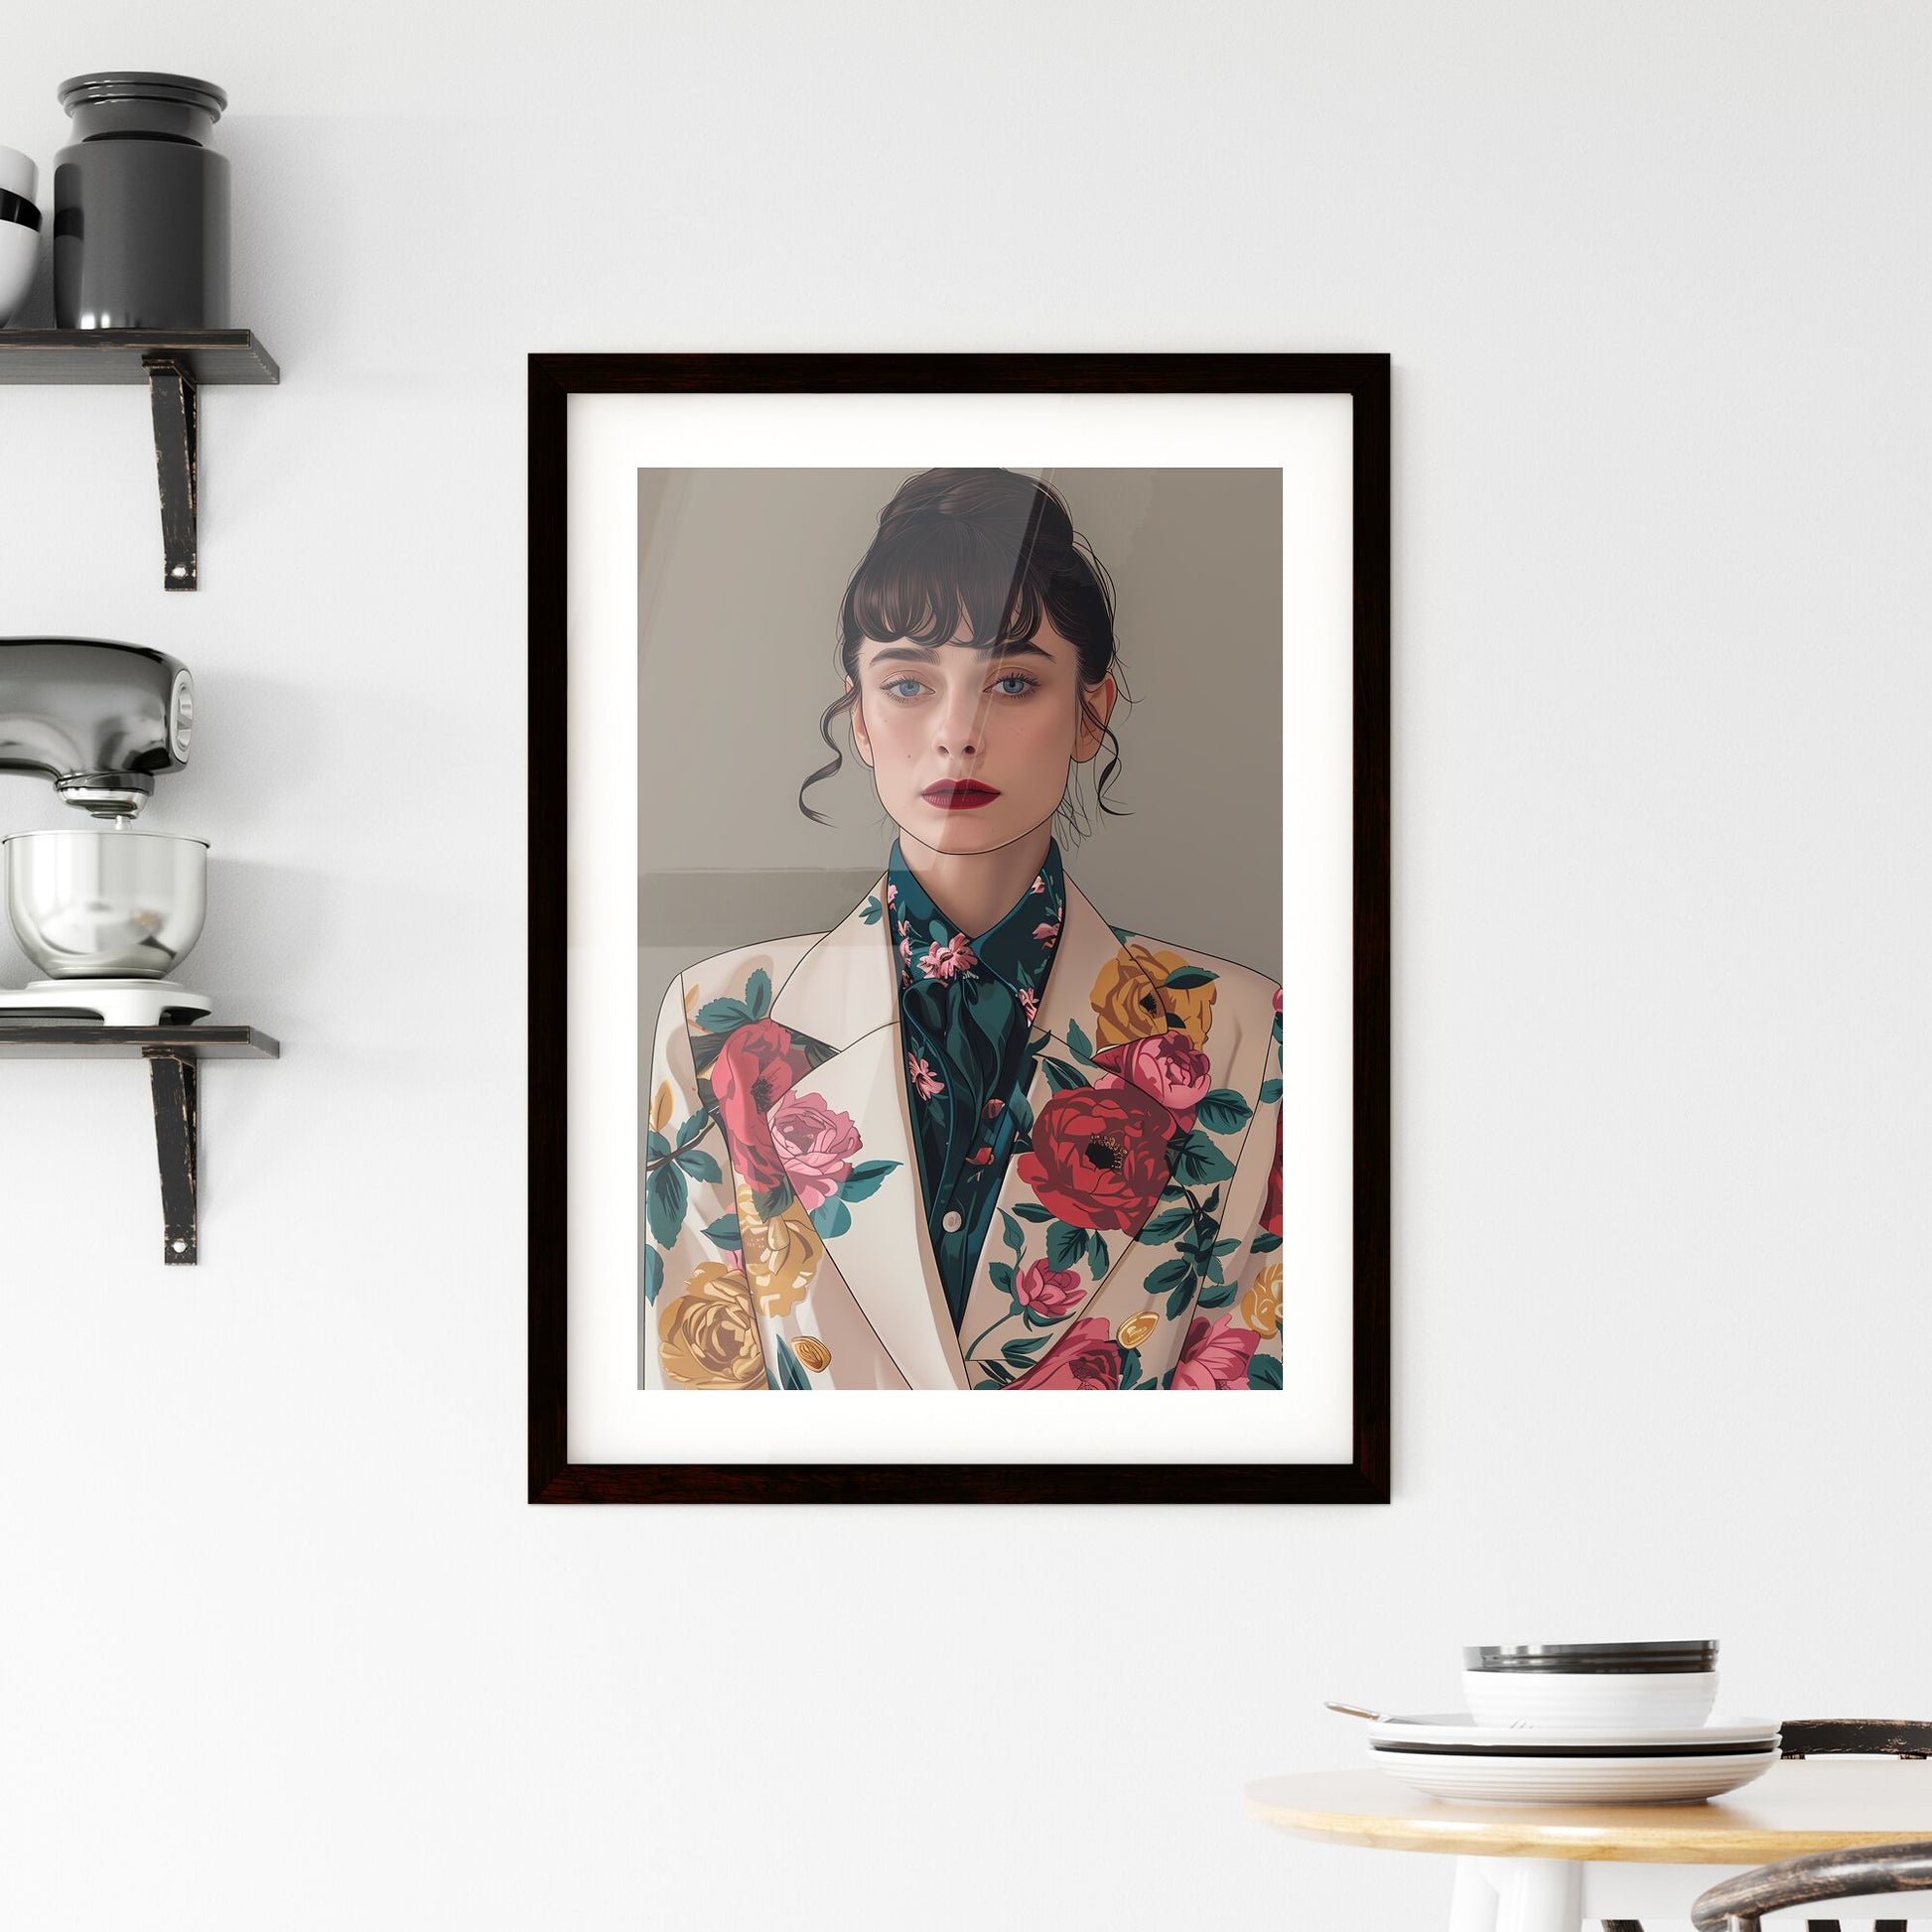 Spring Blooms in a Floral Fusion: Pastel-Infused Neo-Pop Illustration Depicting a Woman in a Vibrant Blazer Default Title